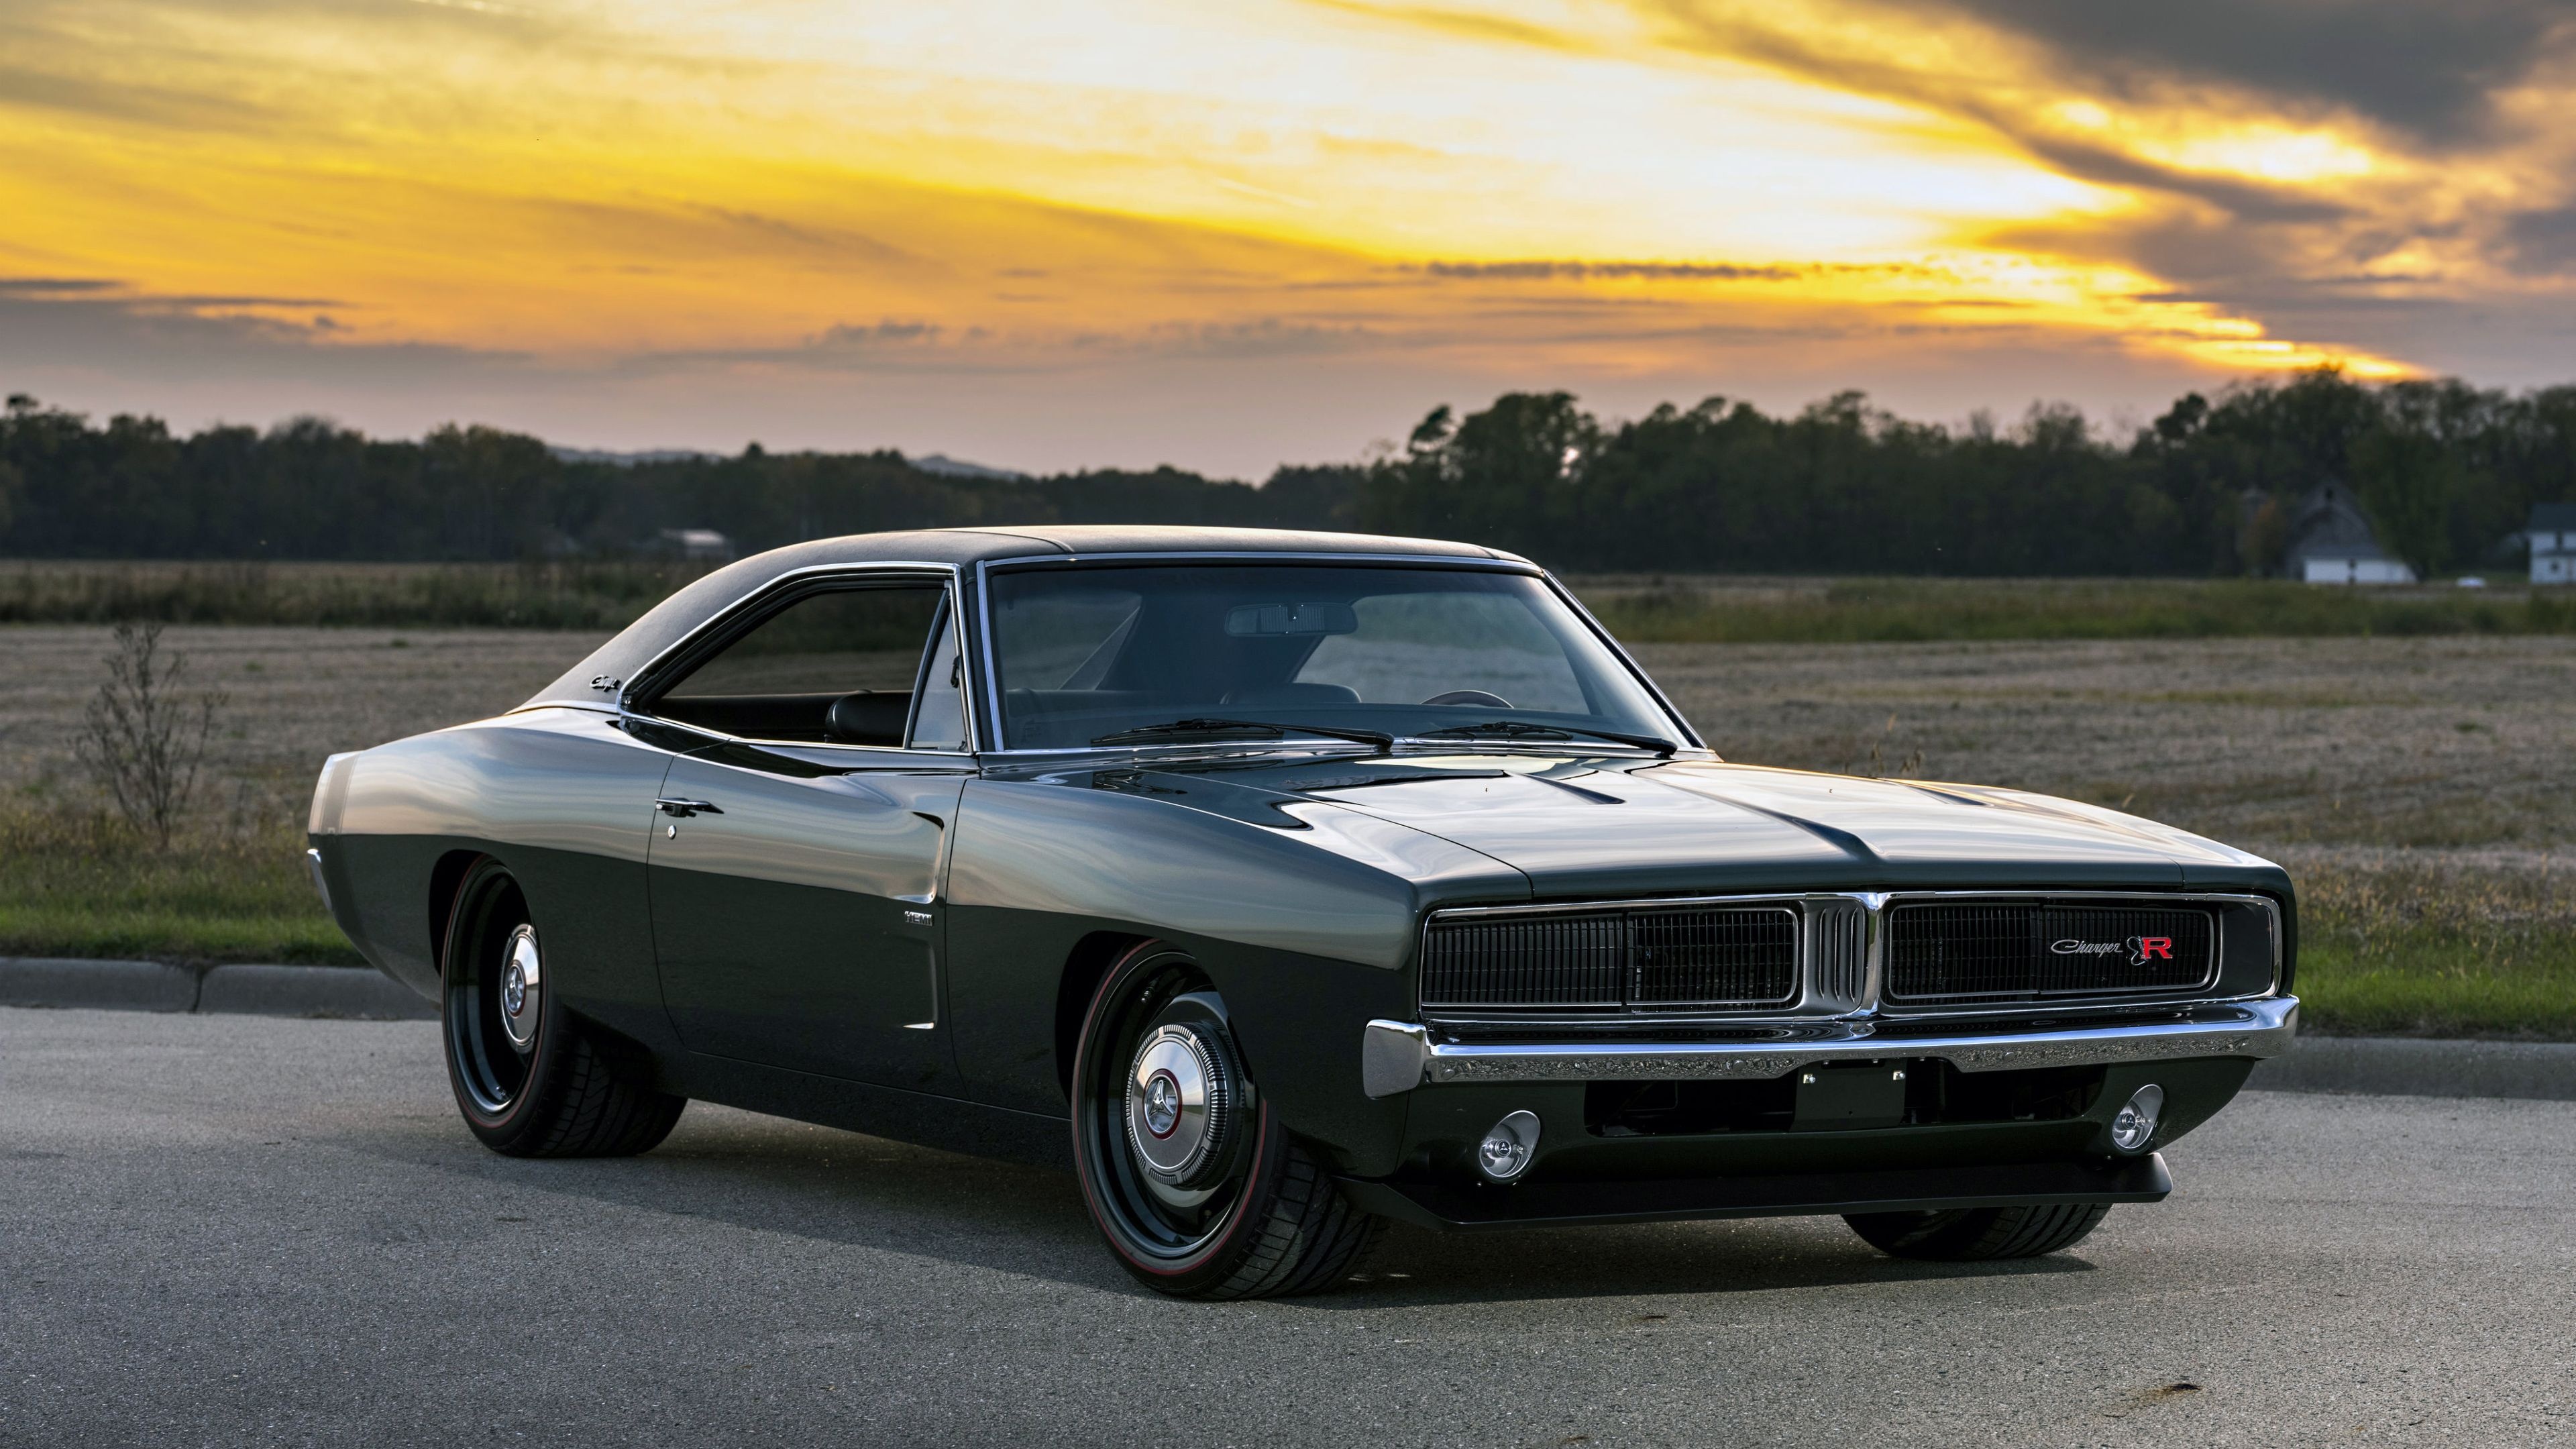 Dodge Charger, Classic muscle car, Iconic design, Unmatched performance, 3840x2160 4K Desktop